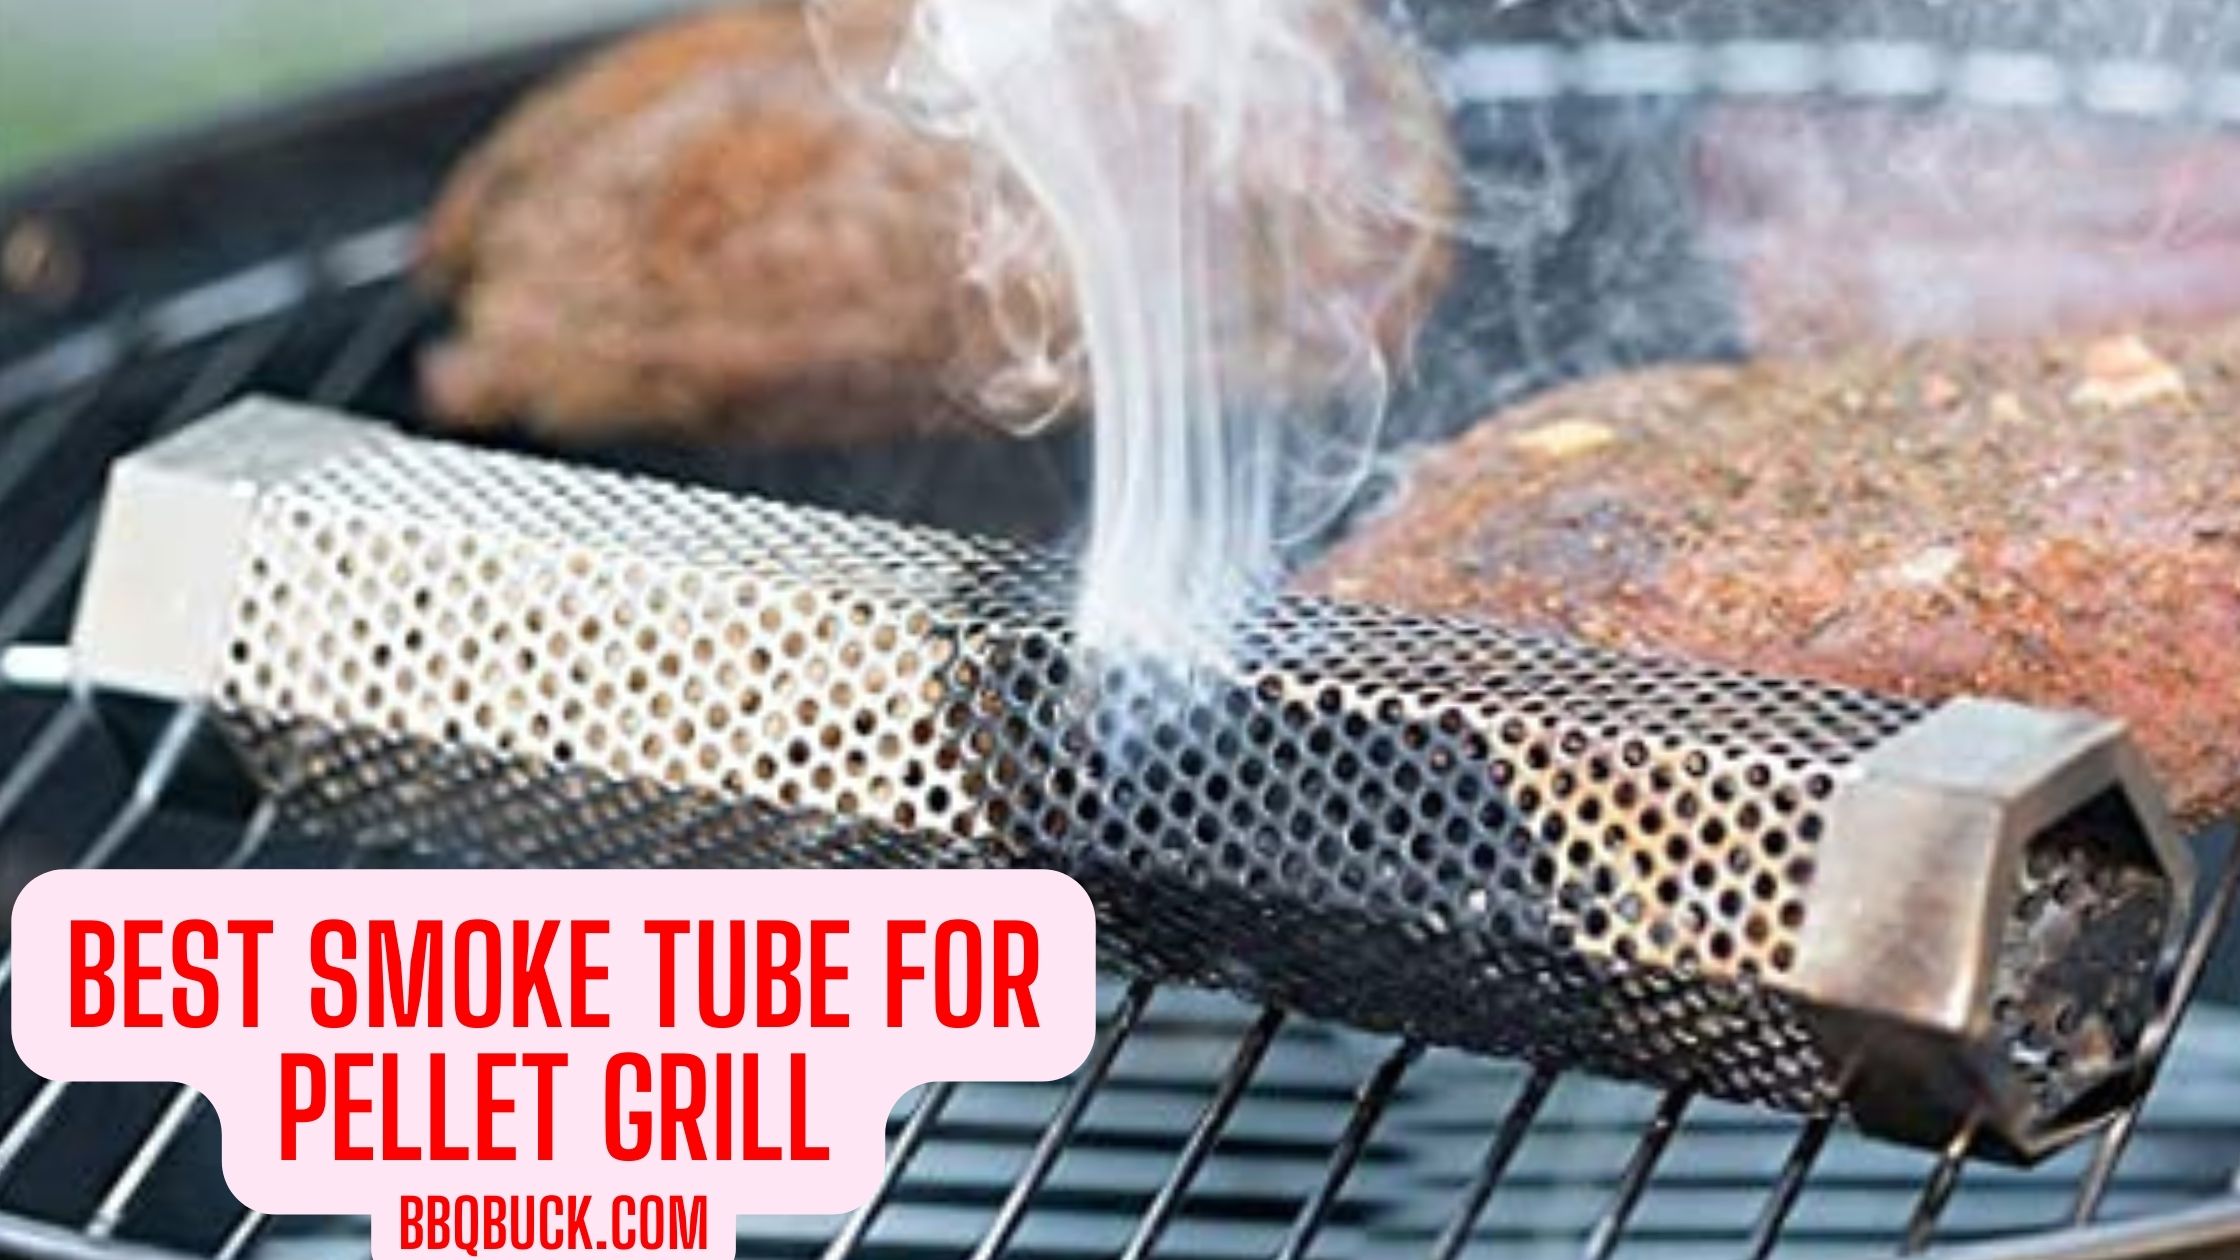 Best Smoke Tube For Pellet Grill – Review & Buying Guide